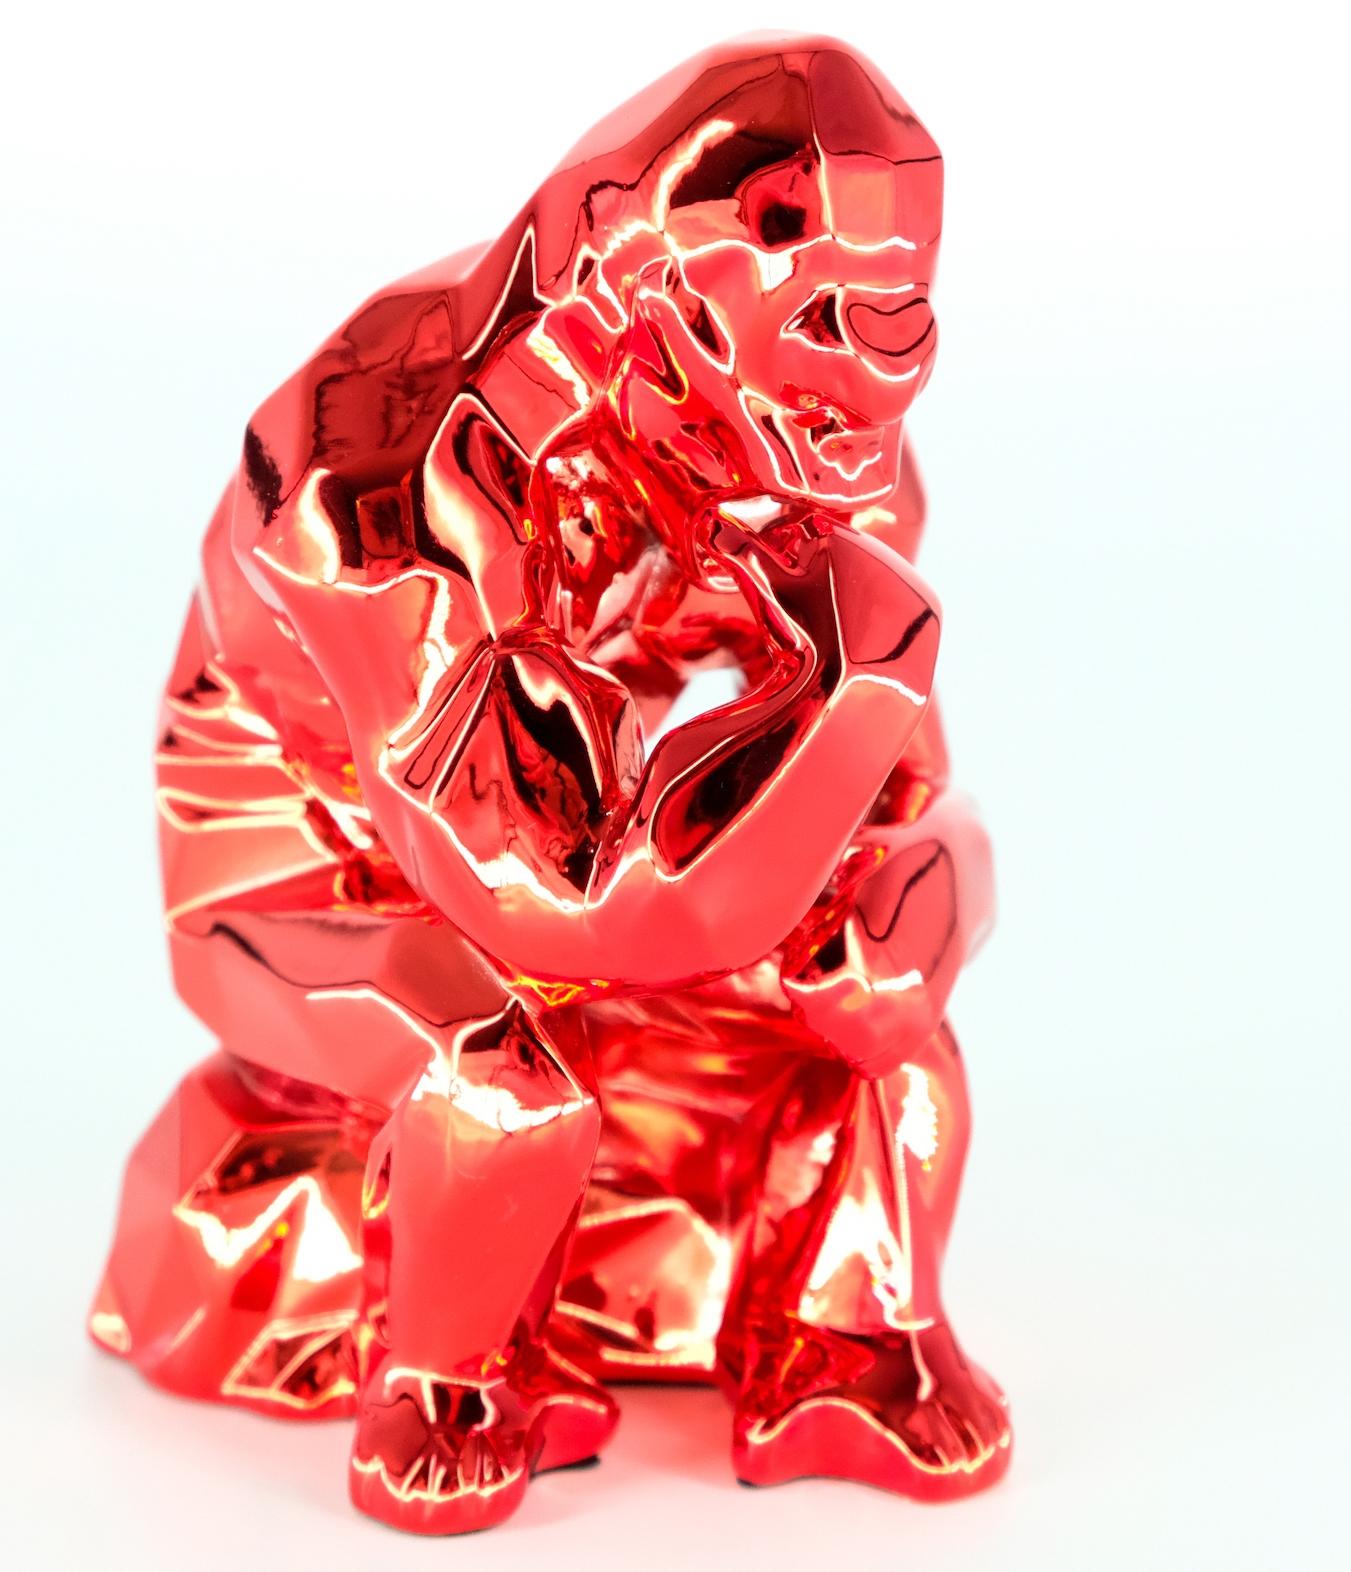 Thinker Spirit (Red edition) - Sculpture in original box with artist certificate For Sale 5